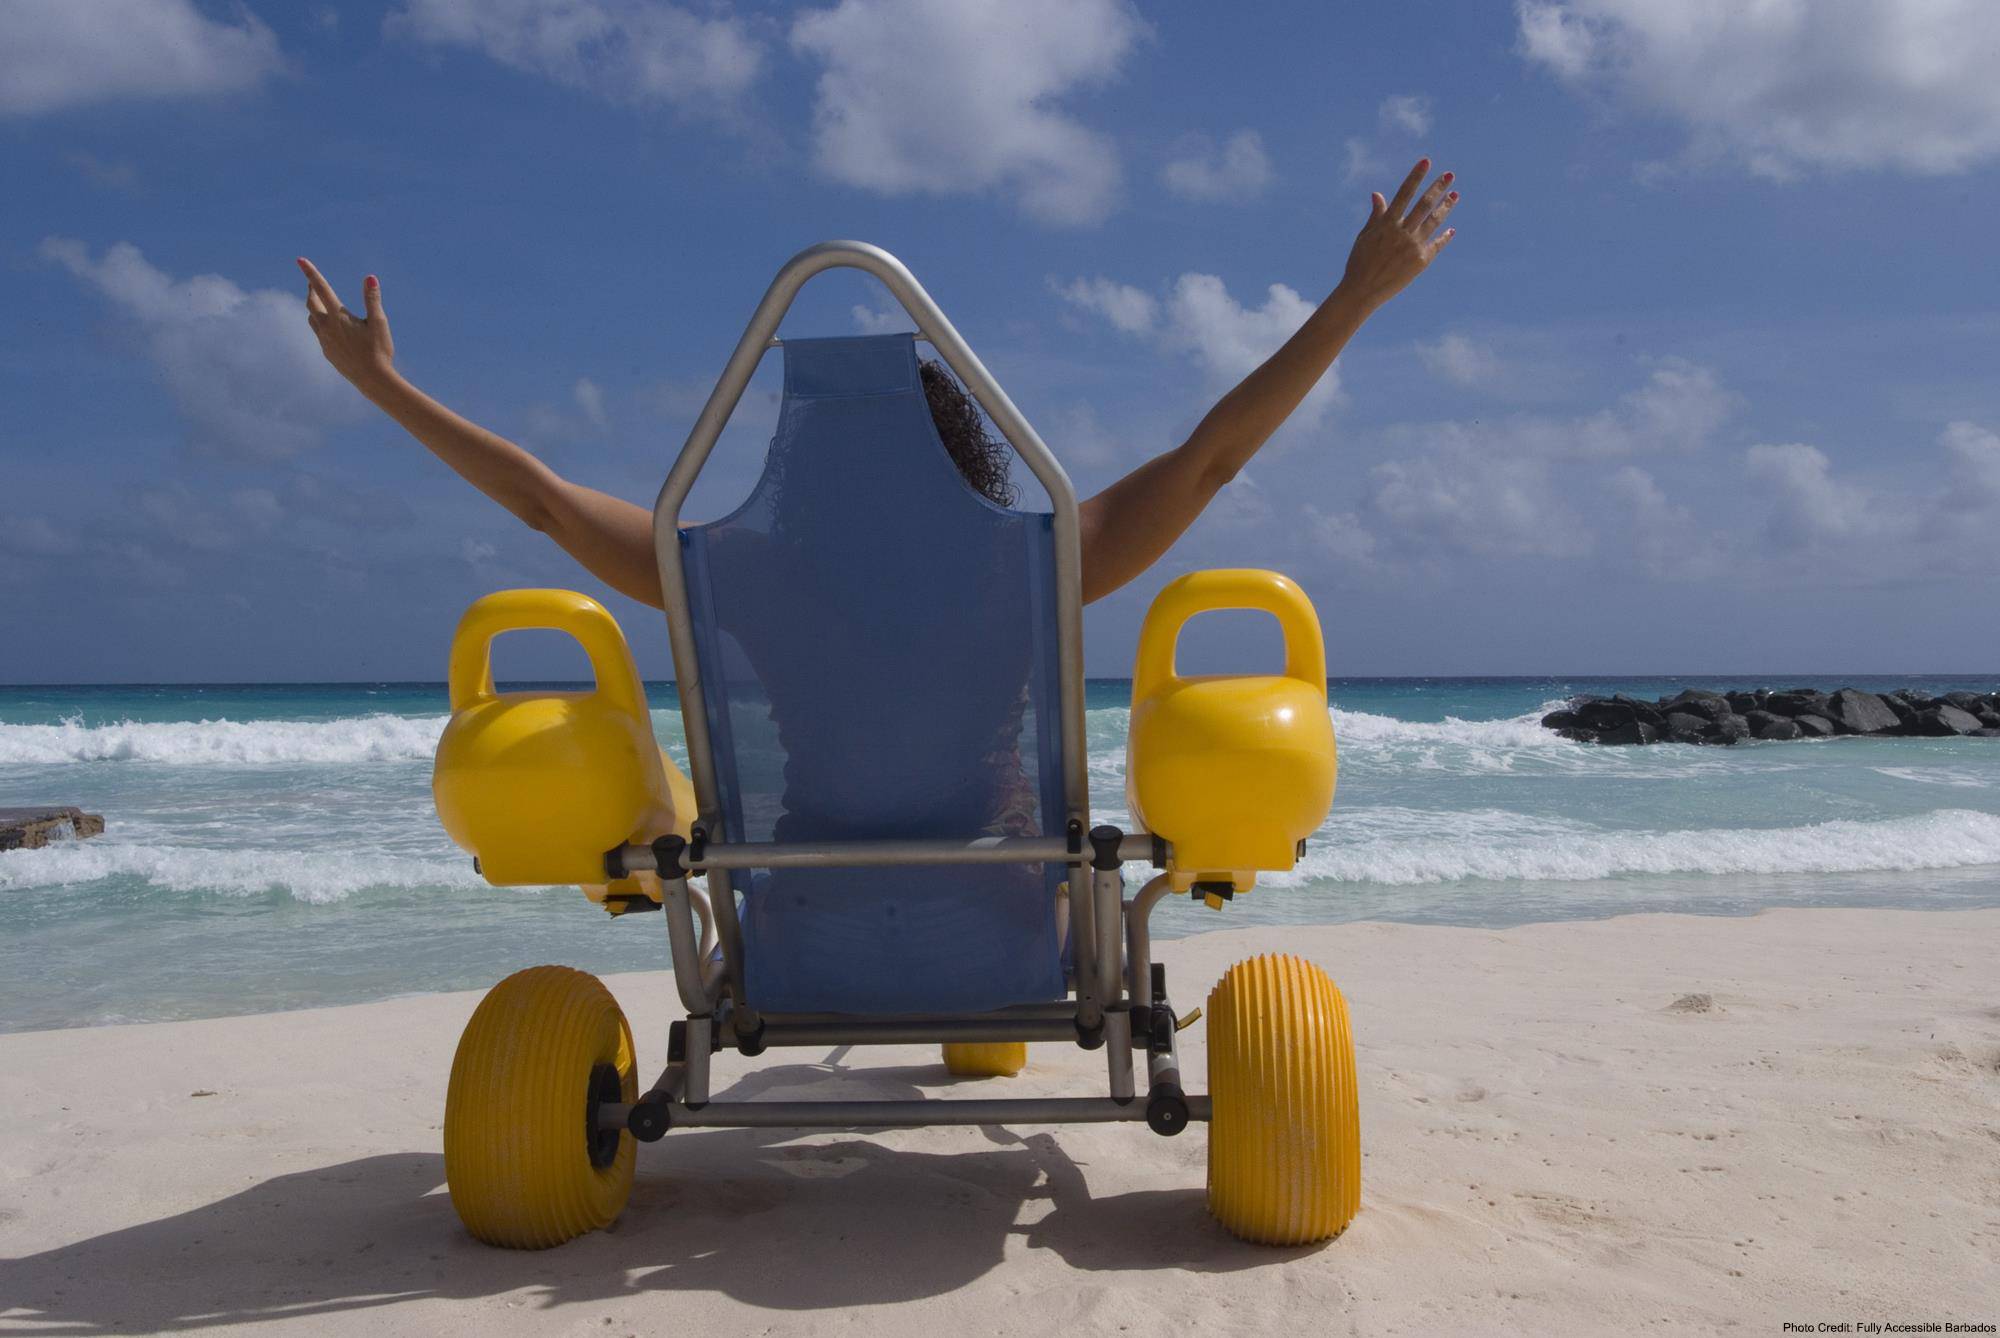 En Route to a Fully Accessible Barbados